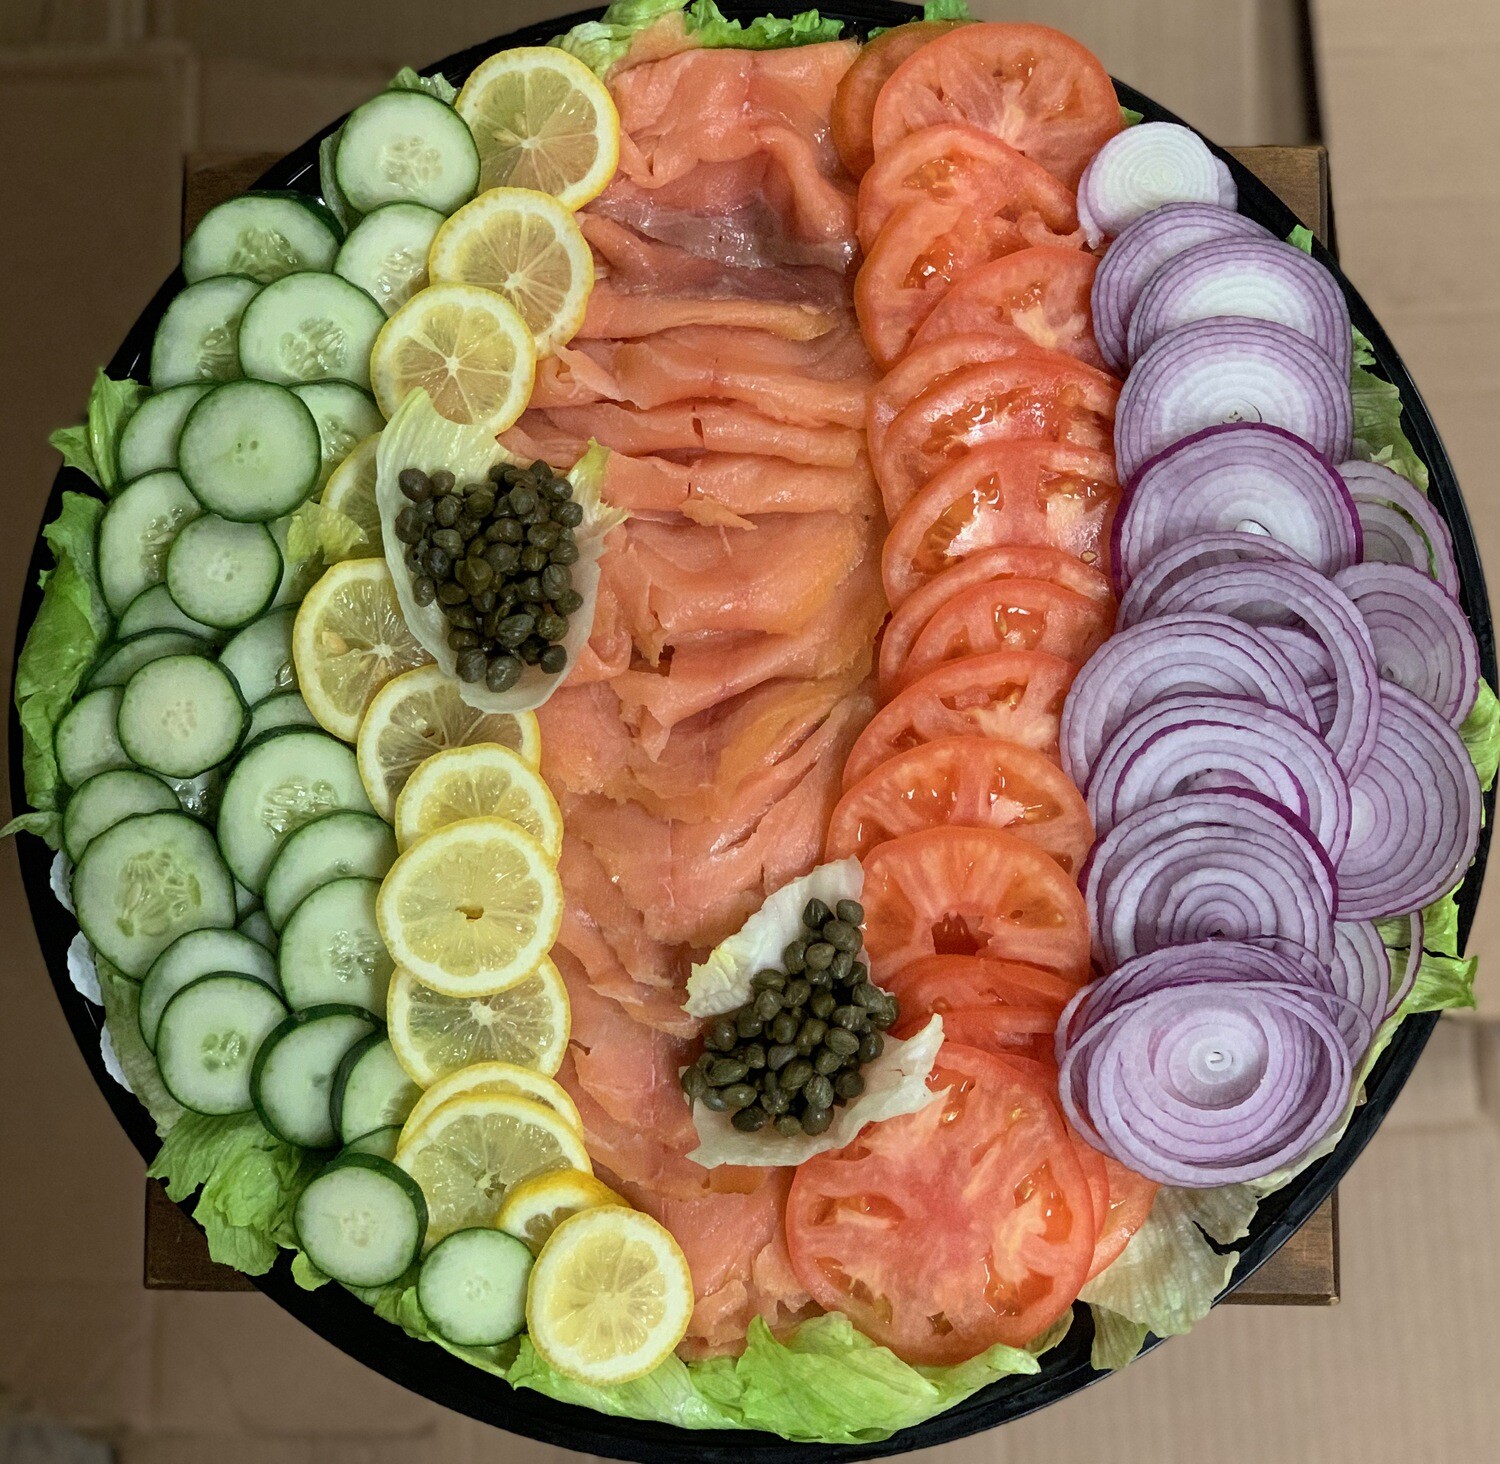 Lox Platter with Bagels (10 to 12 People)